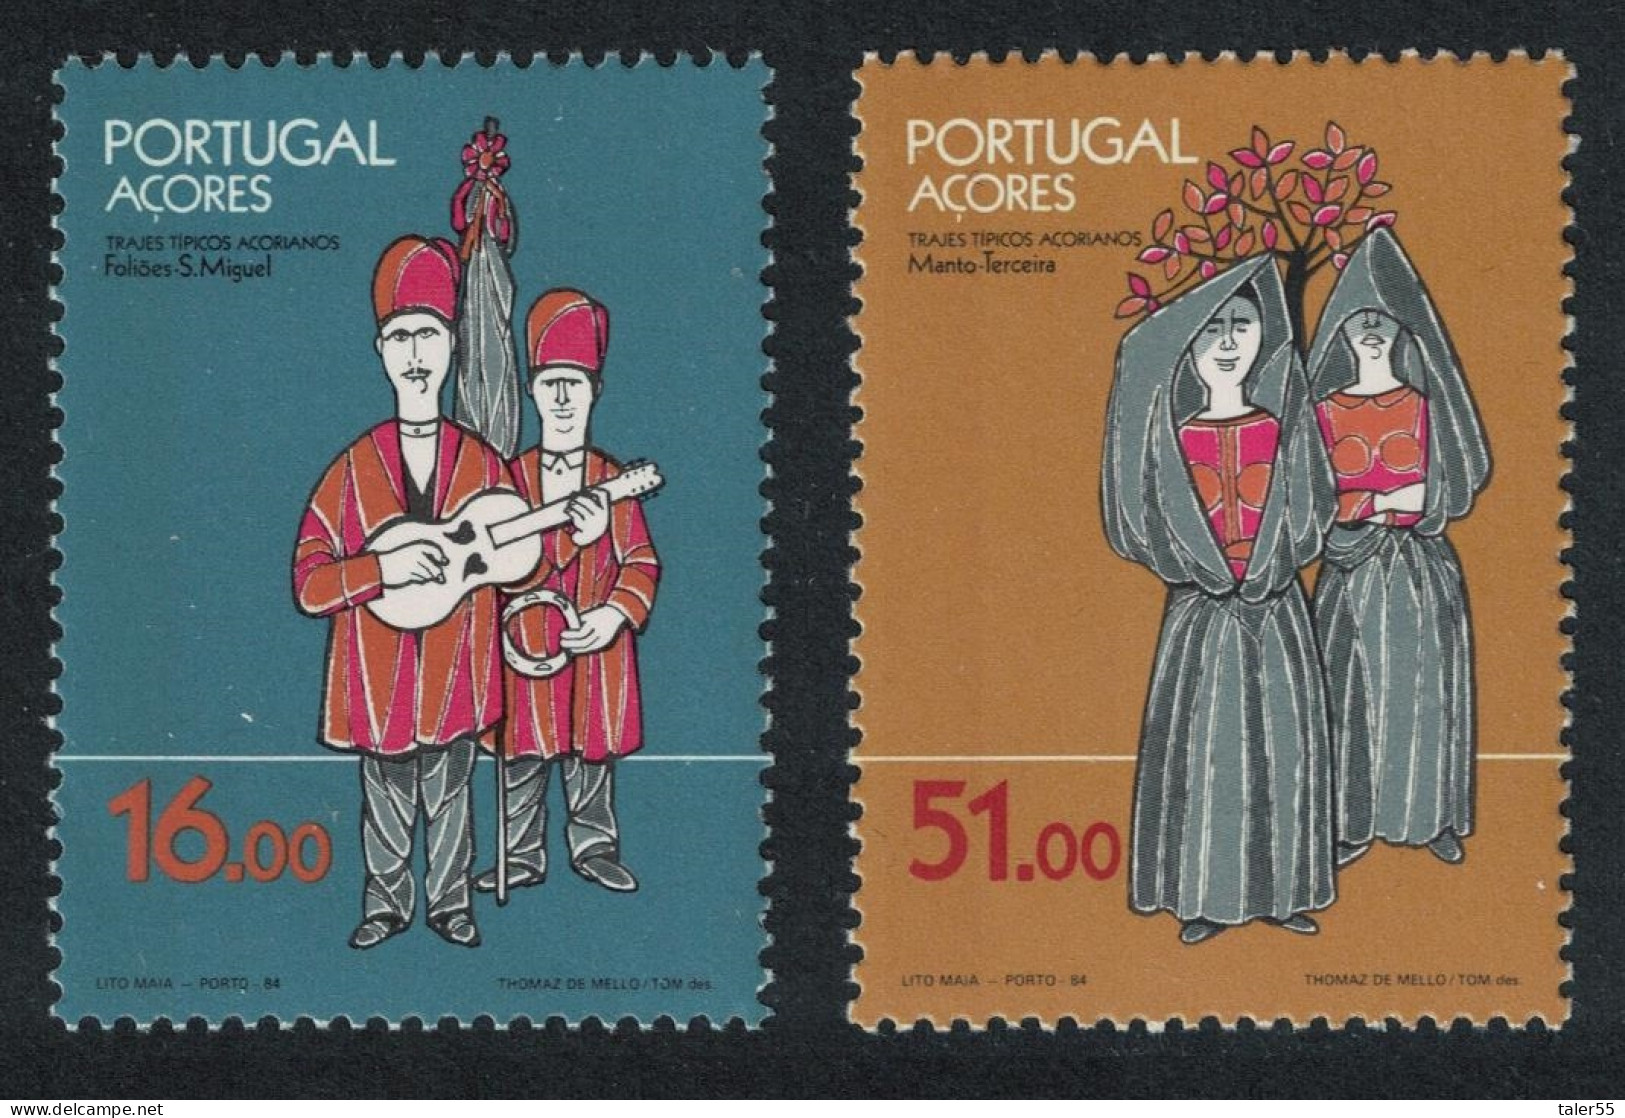 Azores Traditional Costumes Guitar Player Music 2v 1984 MNH SG#452-453 - Azores